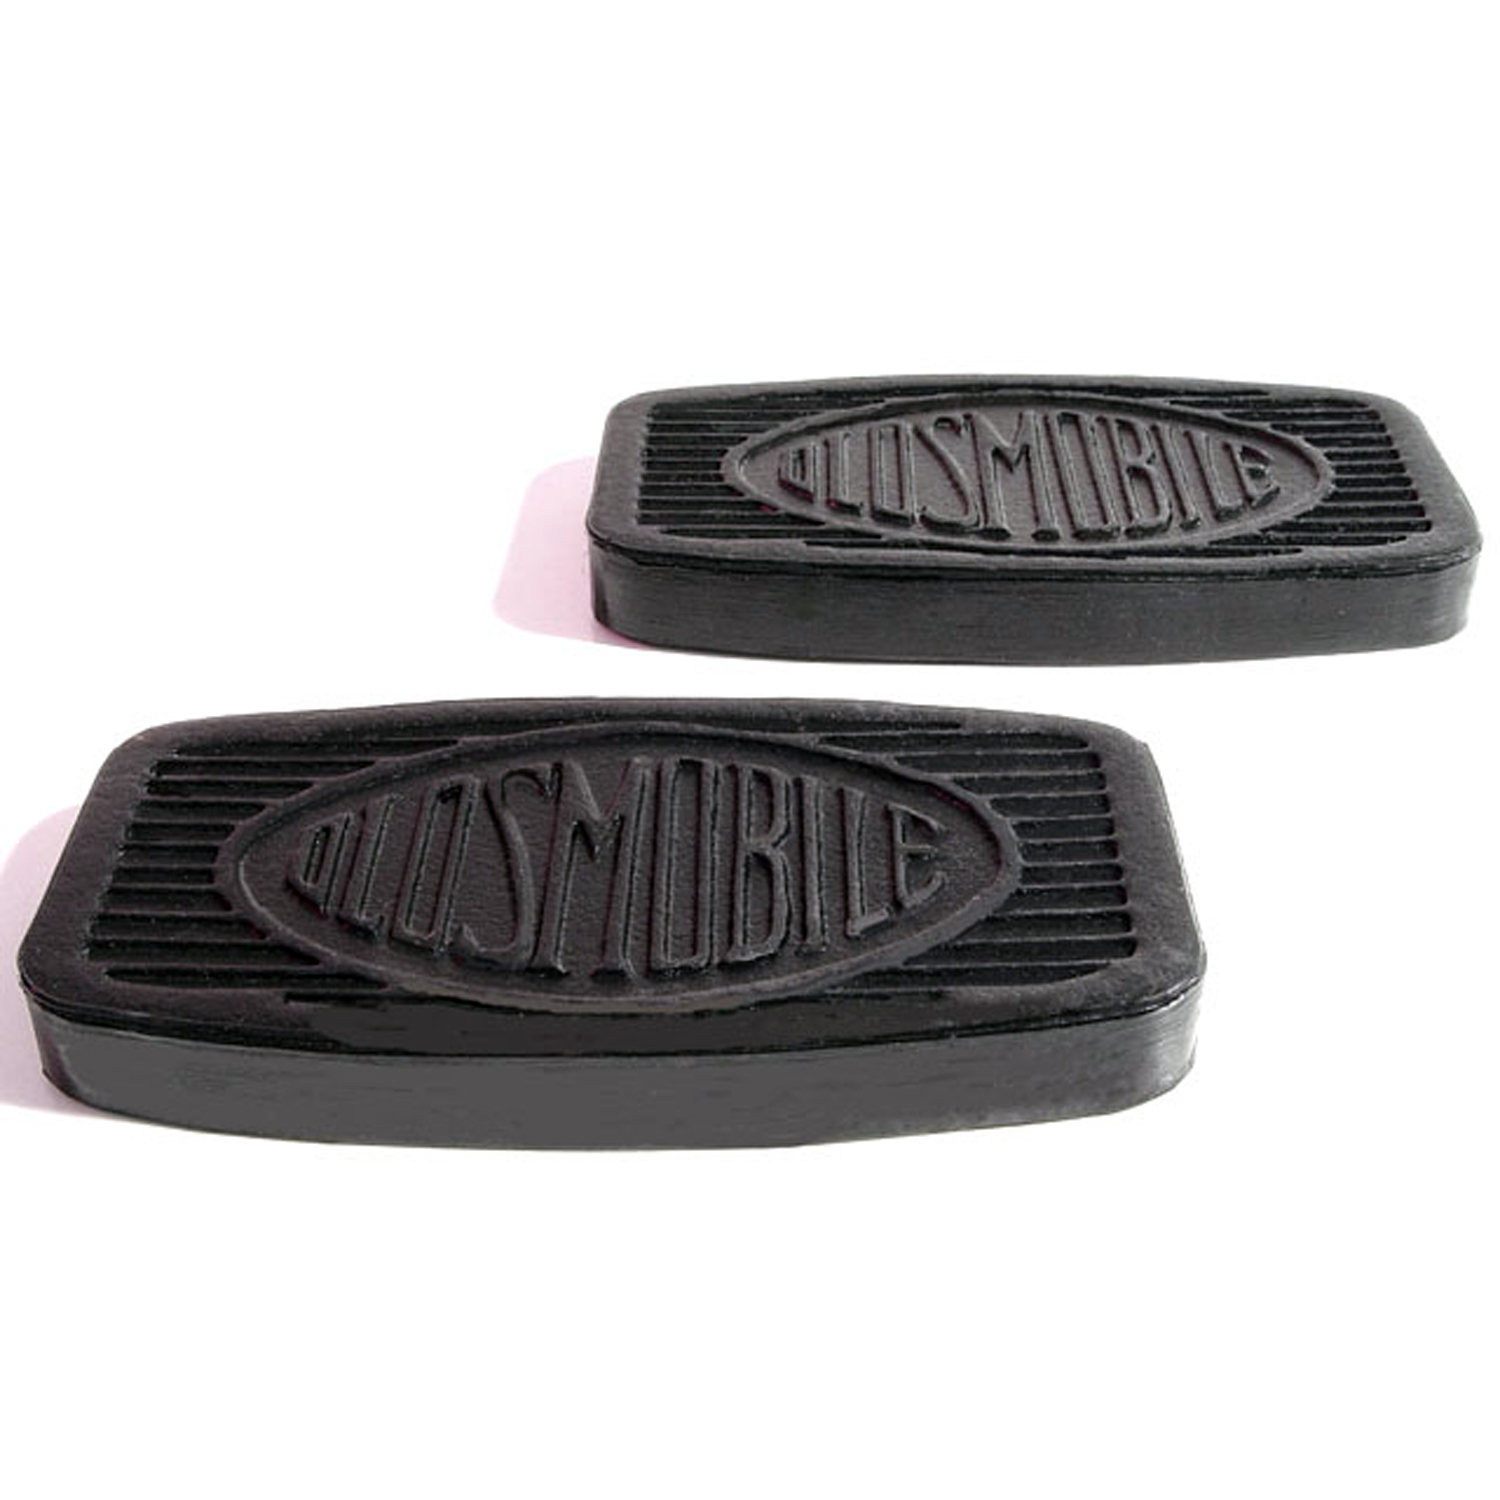 1929 Oldsmobile Model F-29 Clutch and Brake Pedal Pads.  3-1/2 wide X 1-3/16 long-CB 95